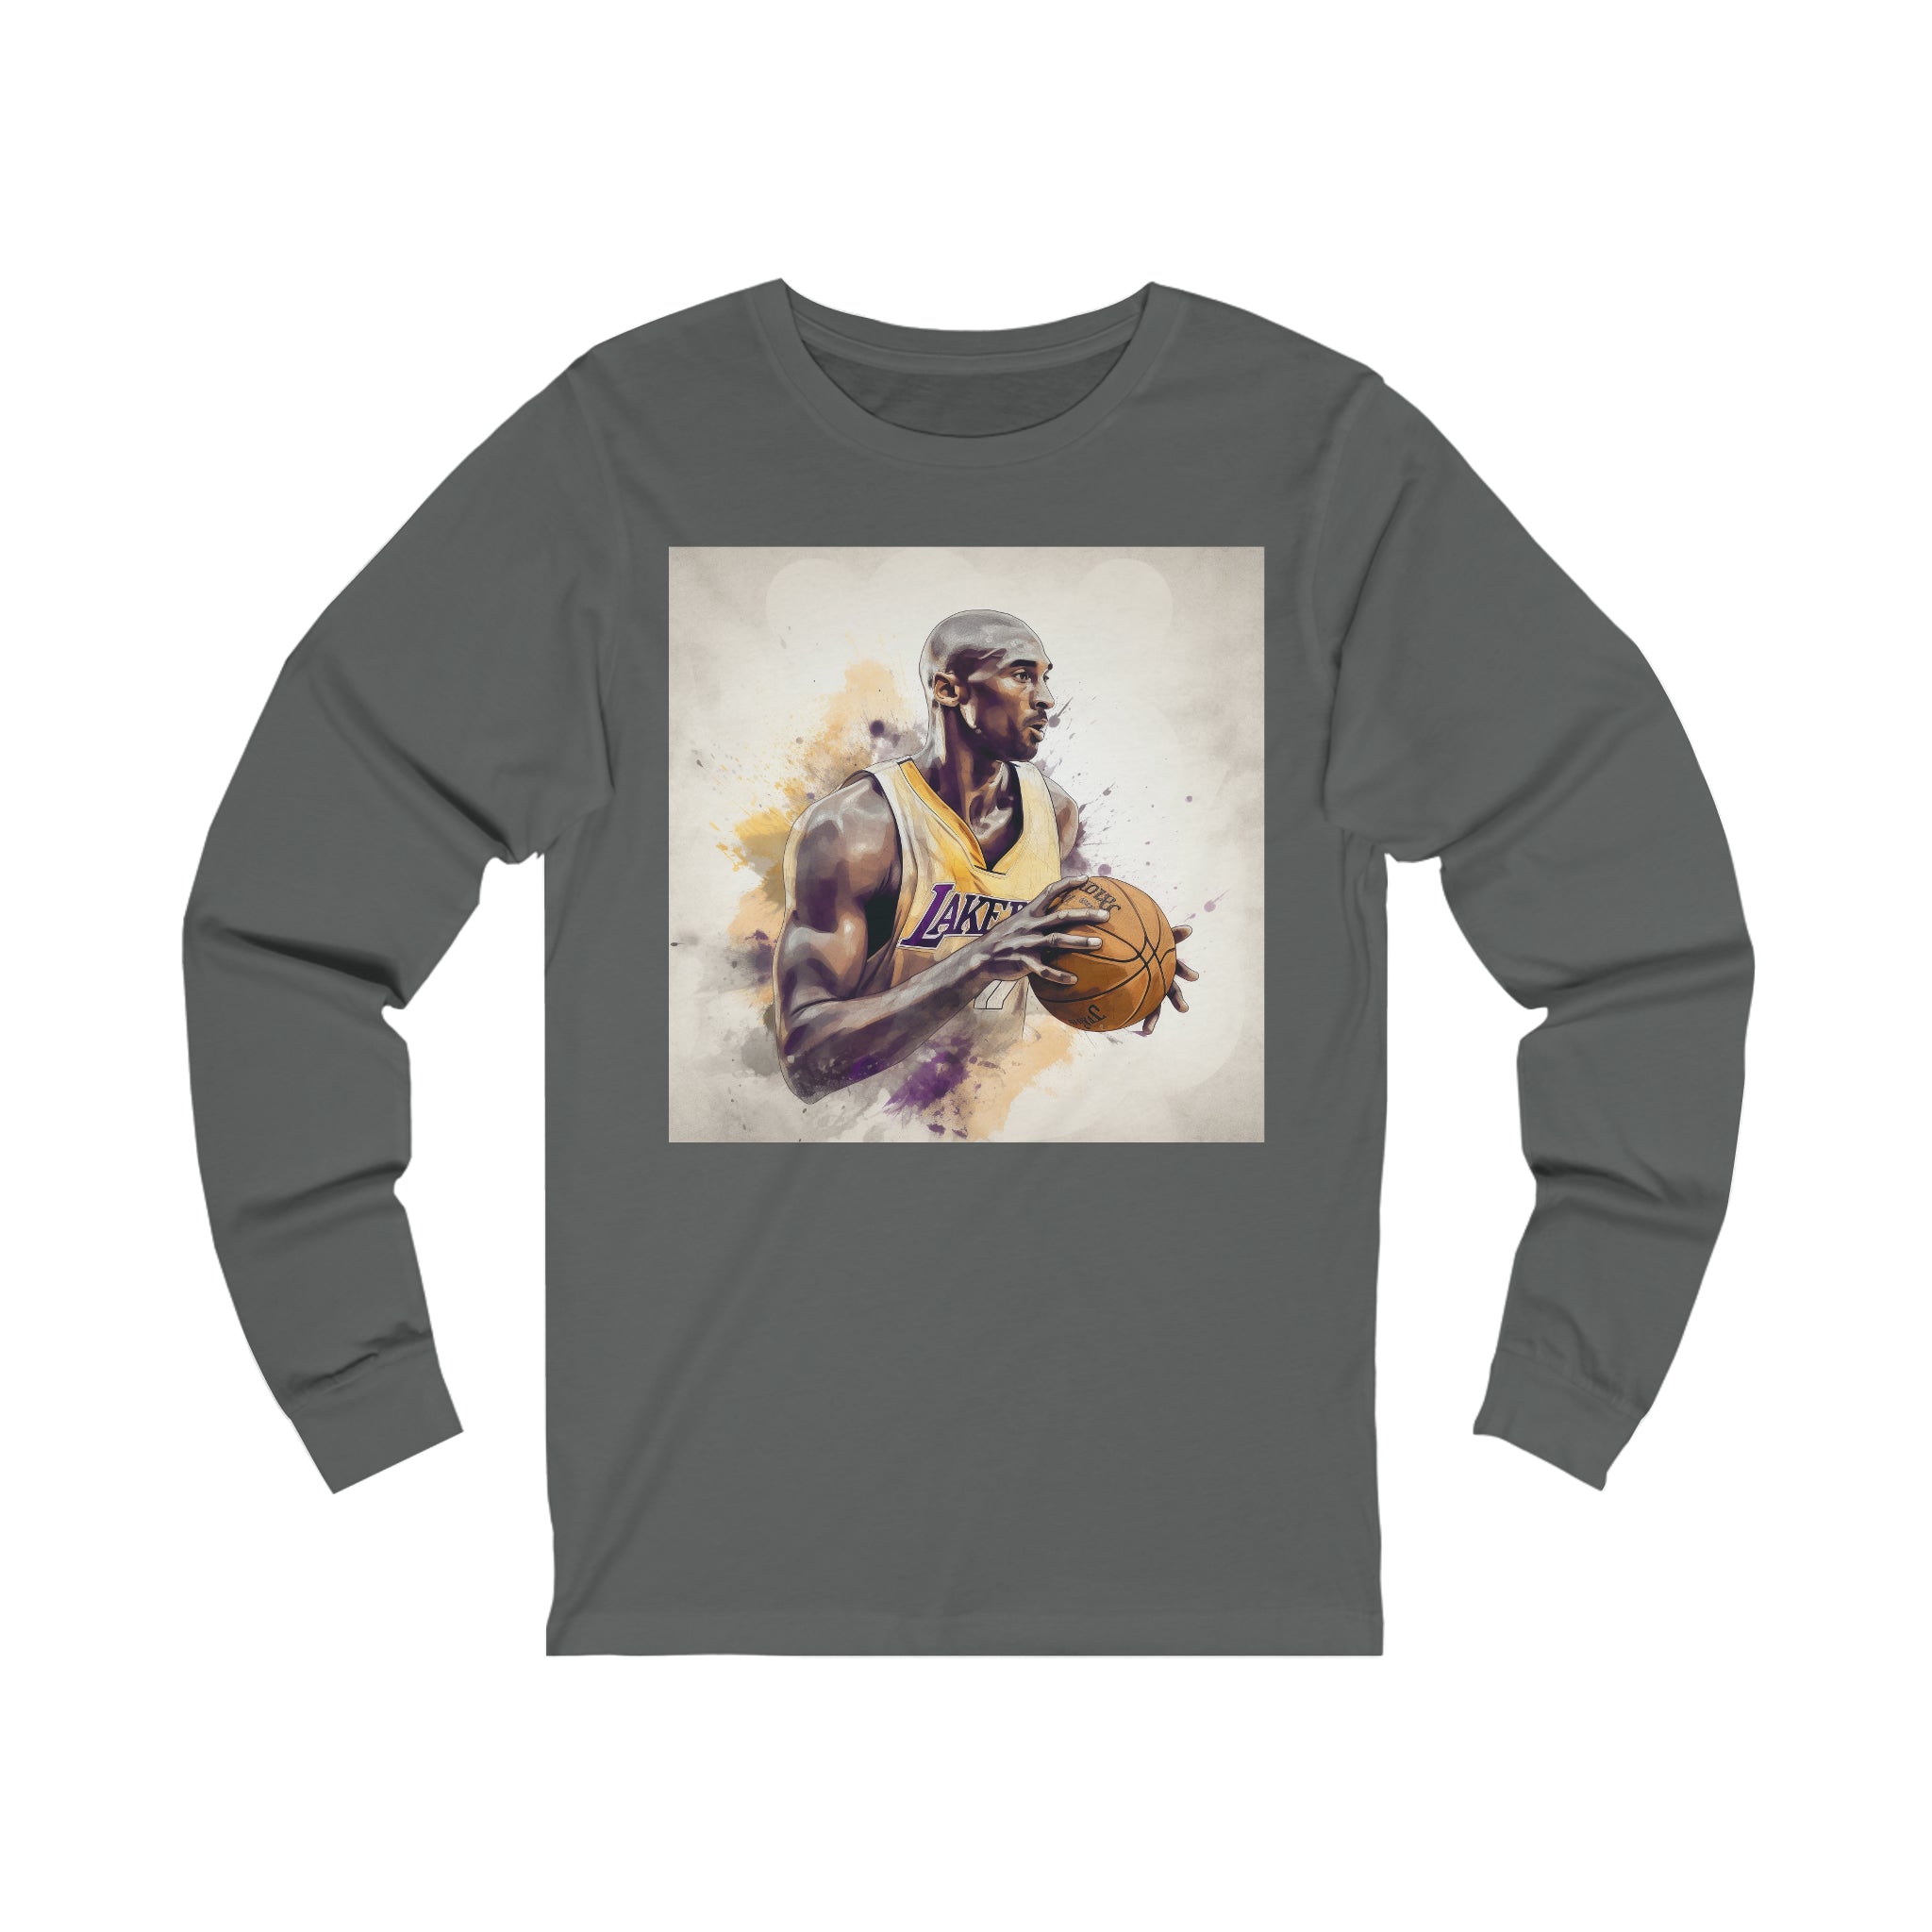 This item features a long sleeve jersey tee with a unique, vibrant watercolor print on the front. The artwork is an artistic tribute to the legendary basketball player K.B., capturing his dynamic playstyle and iconic moments on the court. The shirt is designed to fit comfortably for all genders, with a casual, relaxed silhouette that makes it suitable for various occasions, from sports events to casual outings.